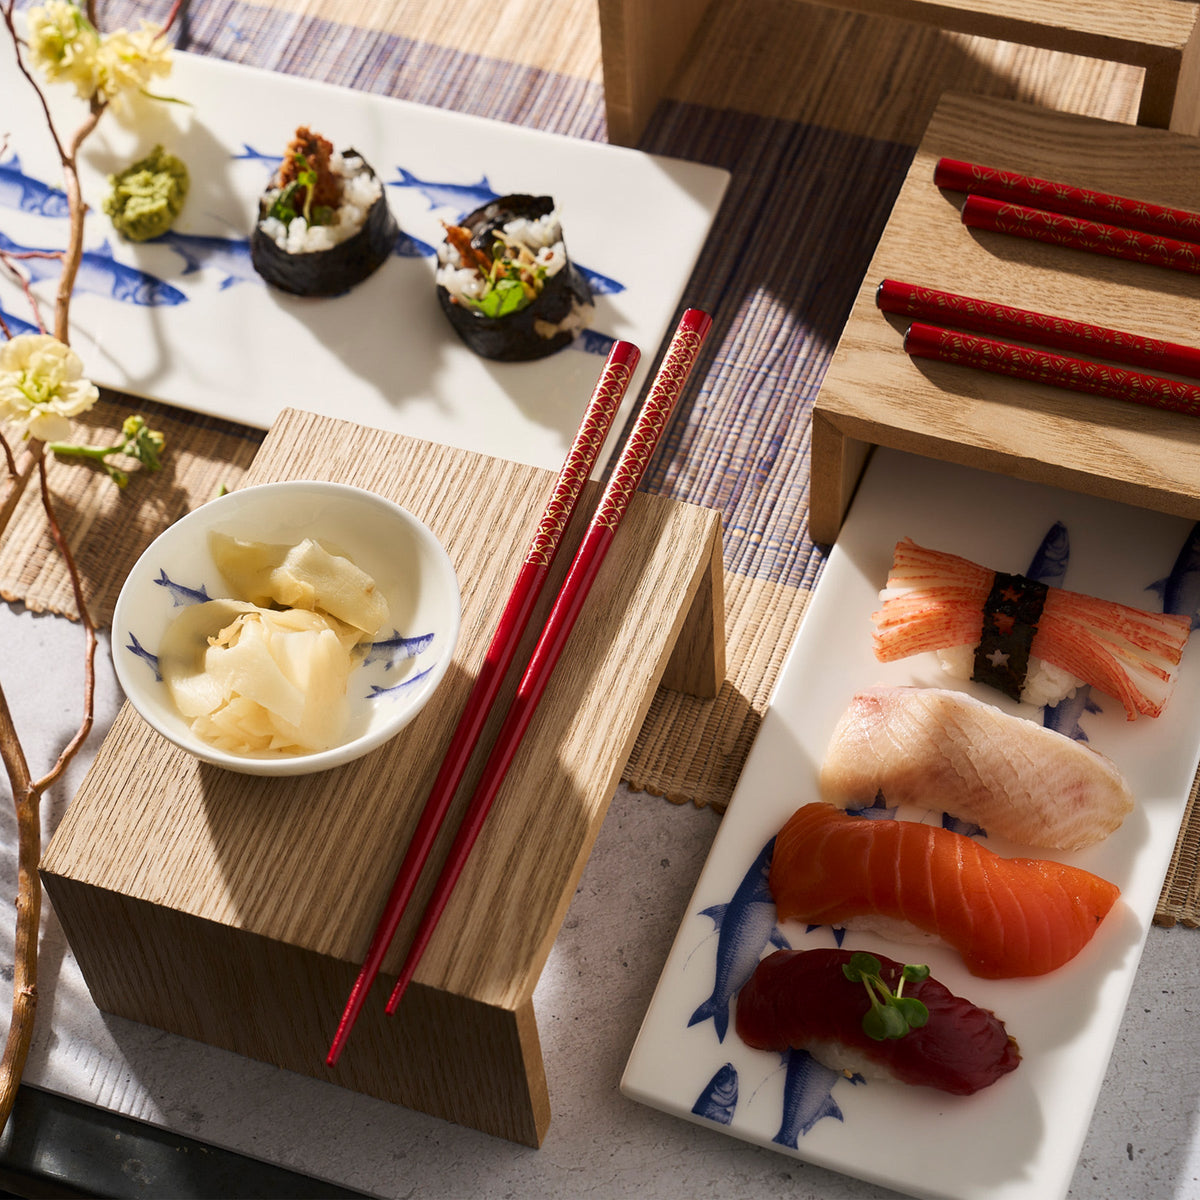 A display of assorted sushi including nigiri and rolls on a **Caskata School of Fish Large Sushi Tray**, ginger slices in a dish, two sets of red chopsticks, and a branch with flowers on a wooden and bamboo mat background.